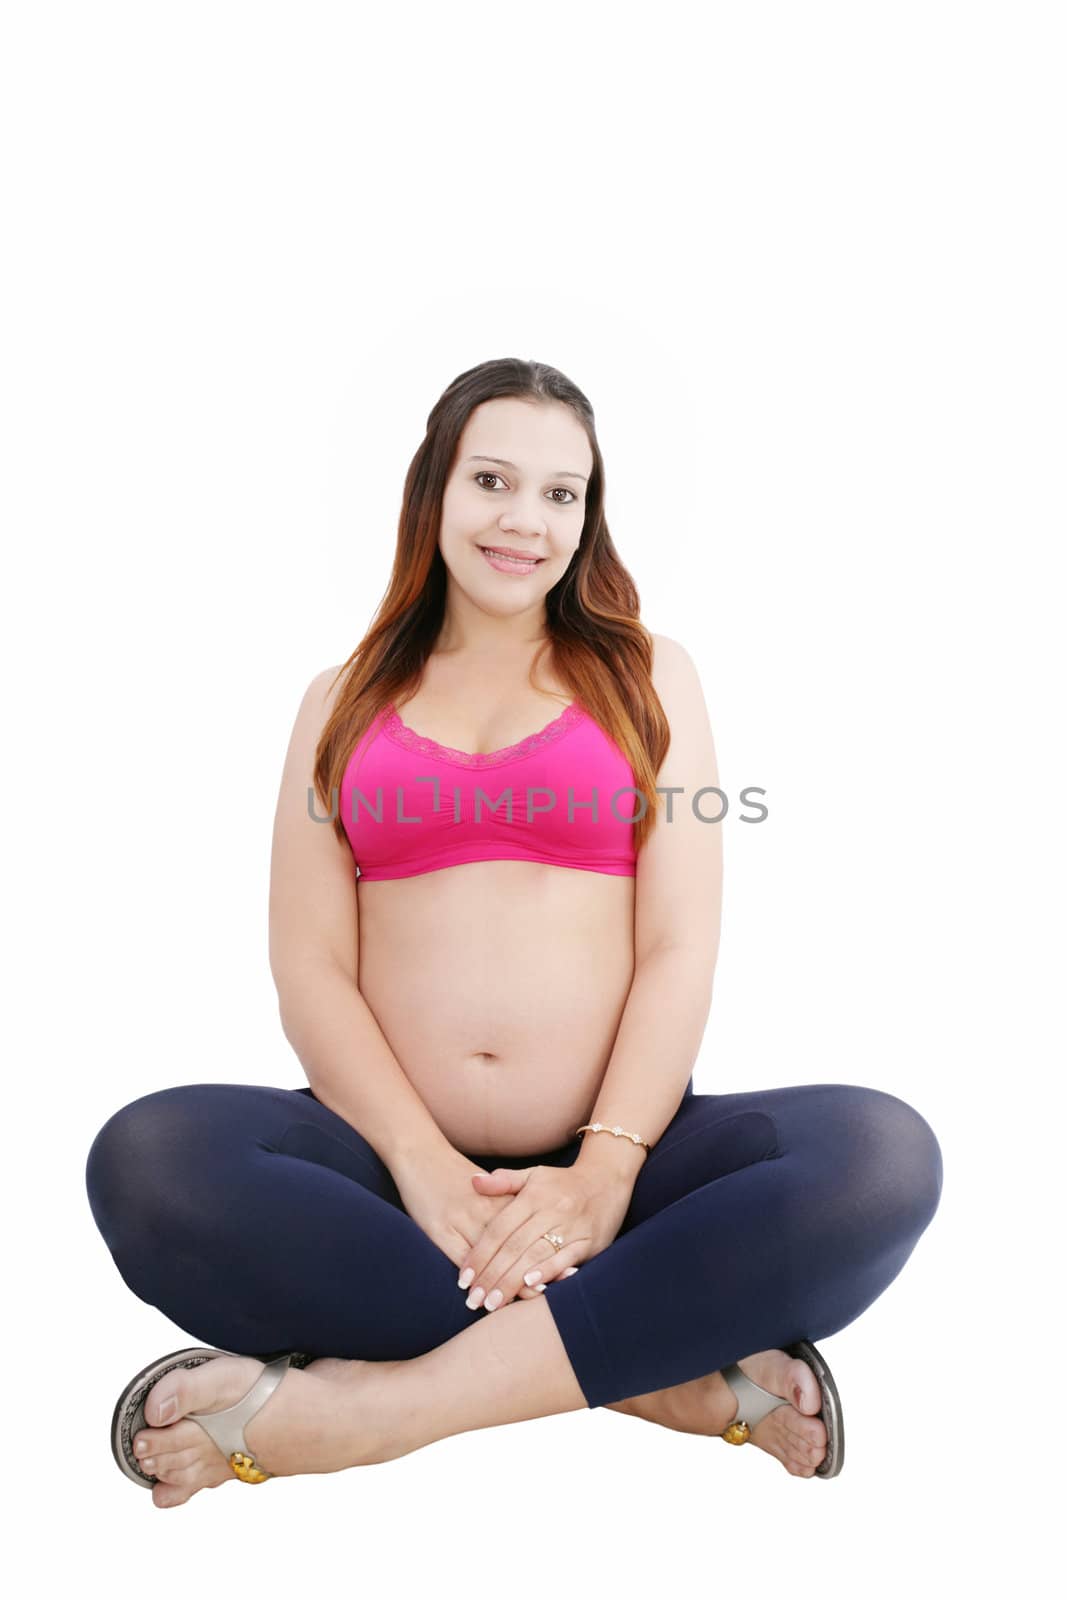 Pregnant woman sitting in floor smiling by dacasdo